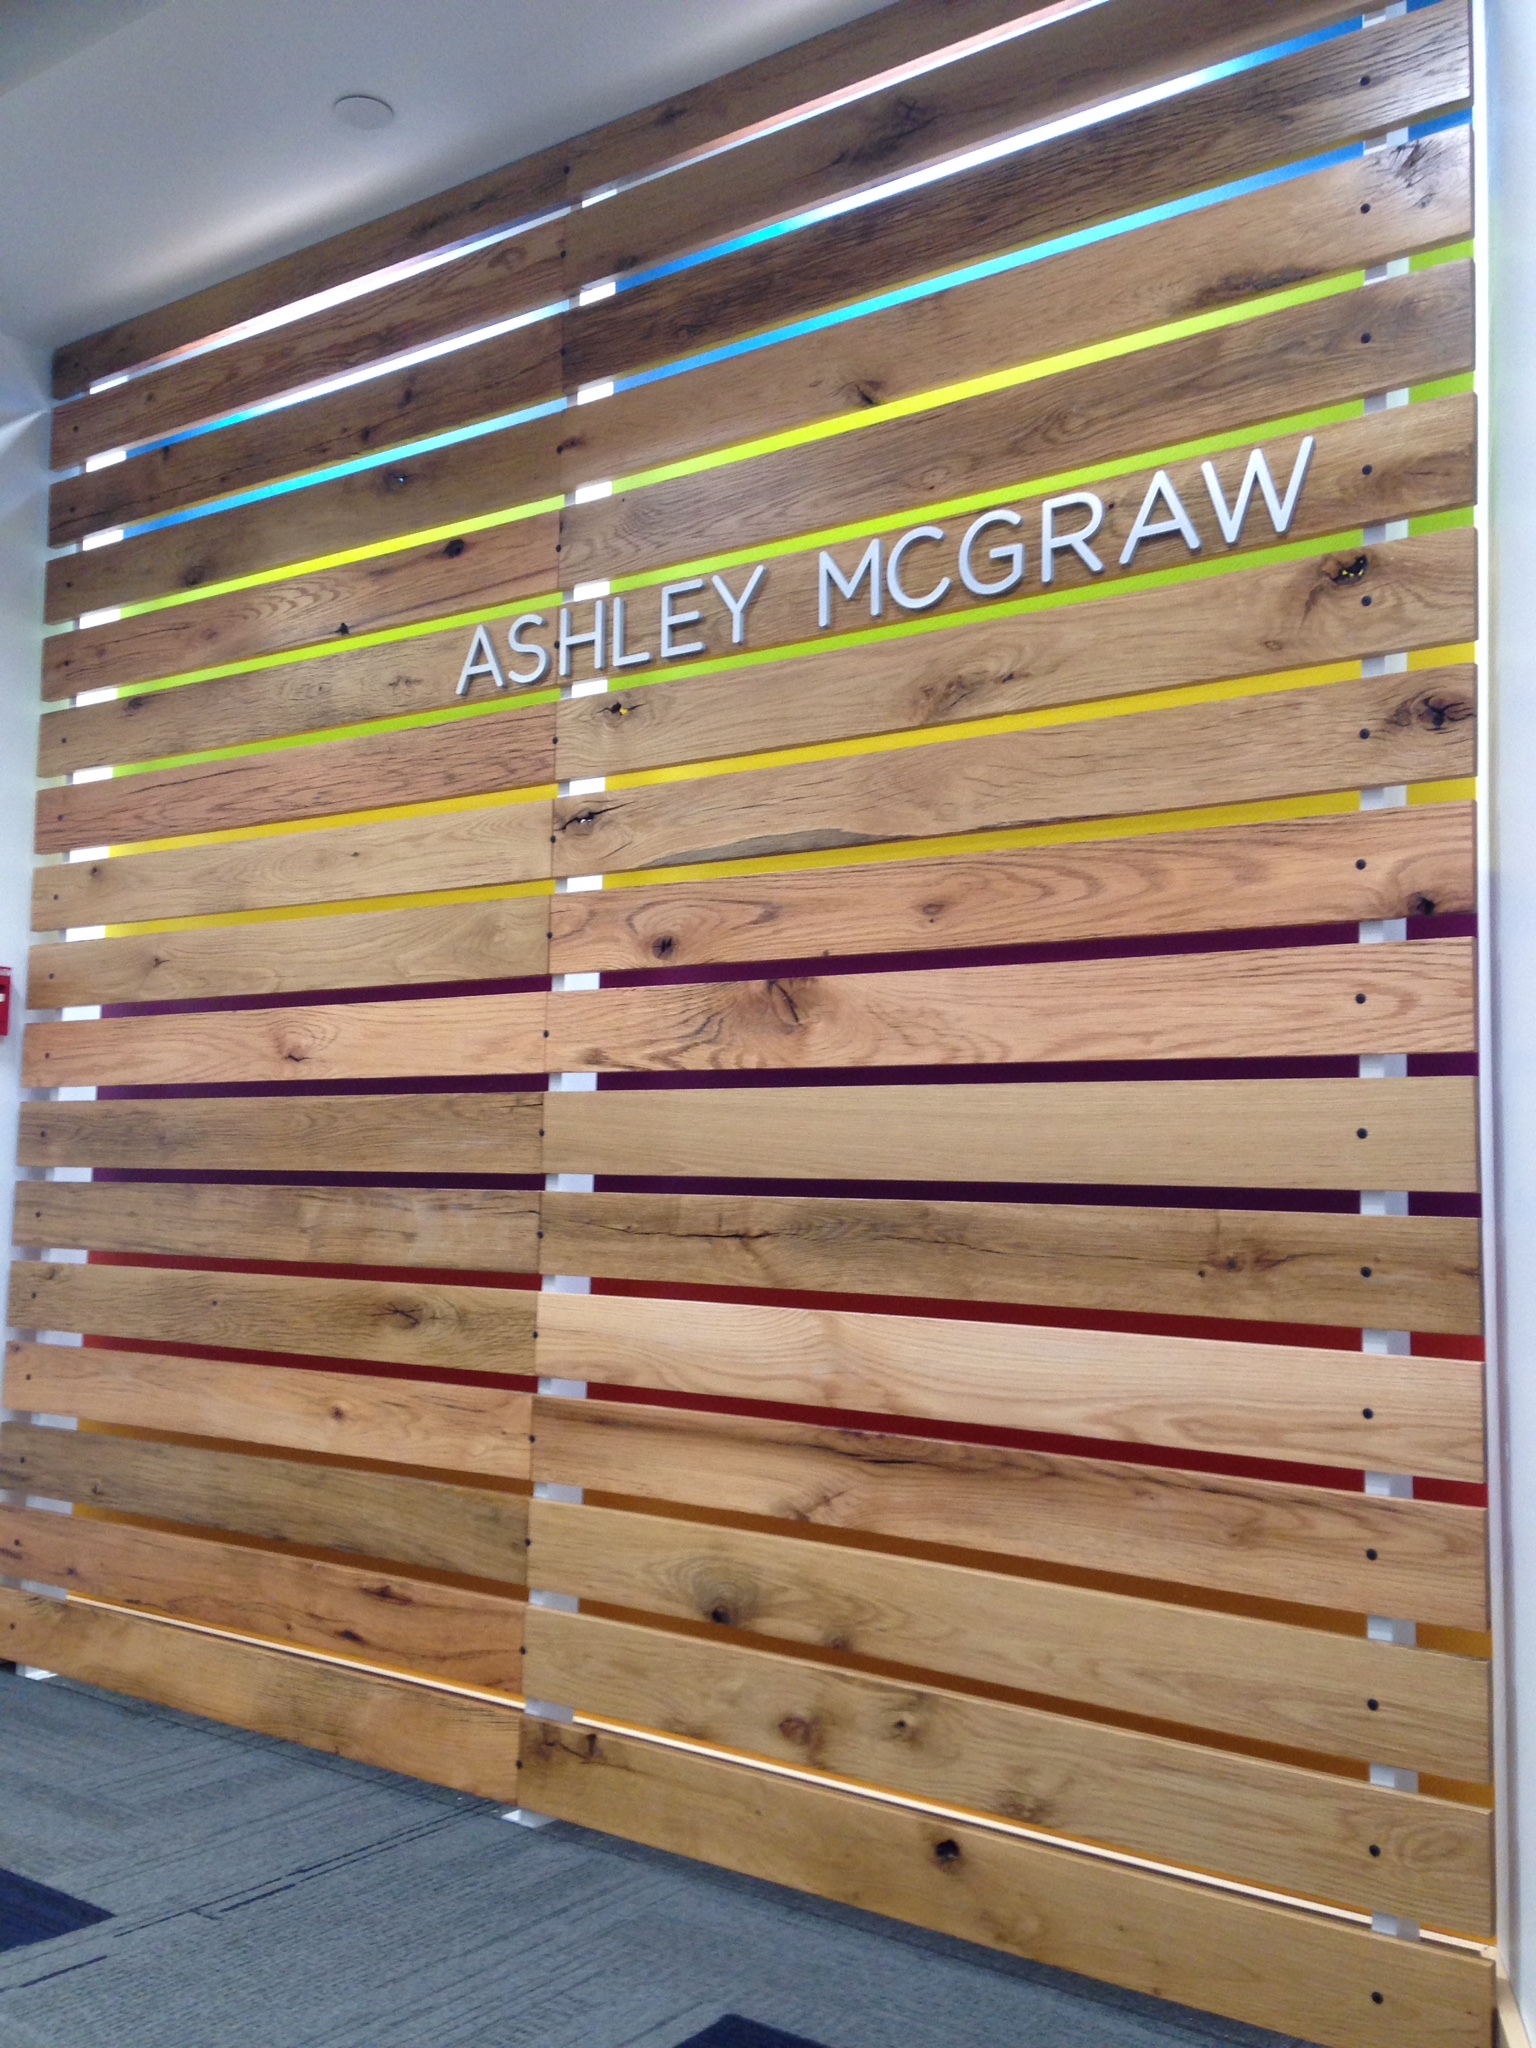 Reclaimed oak boards were used for wall cladding in the entry way.